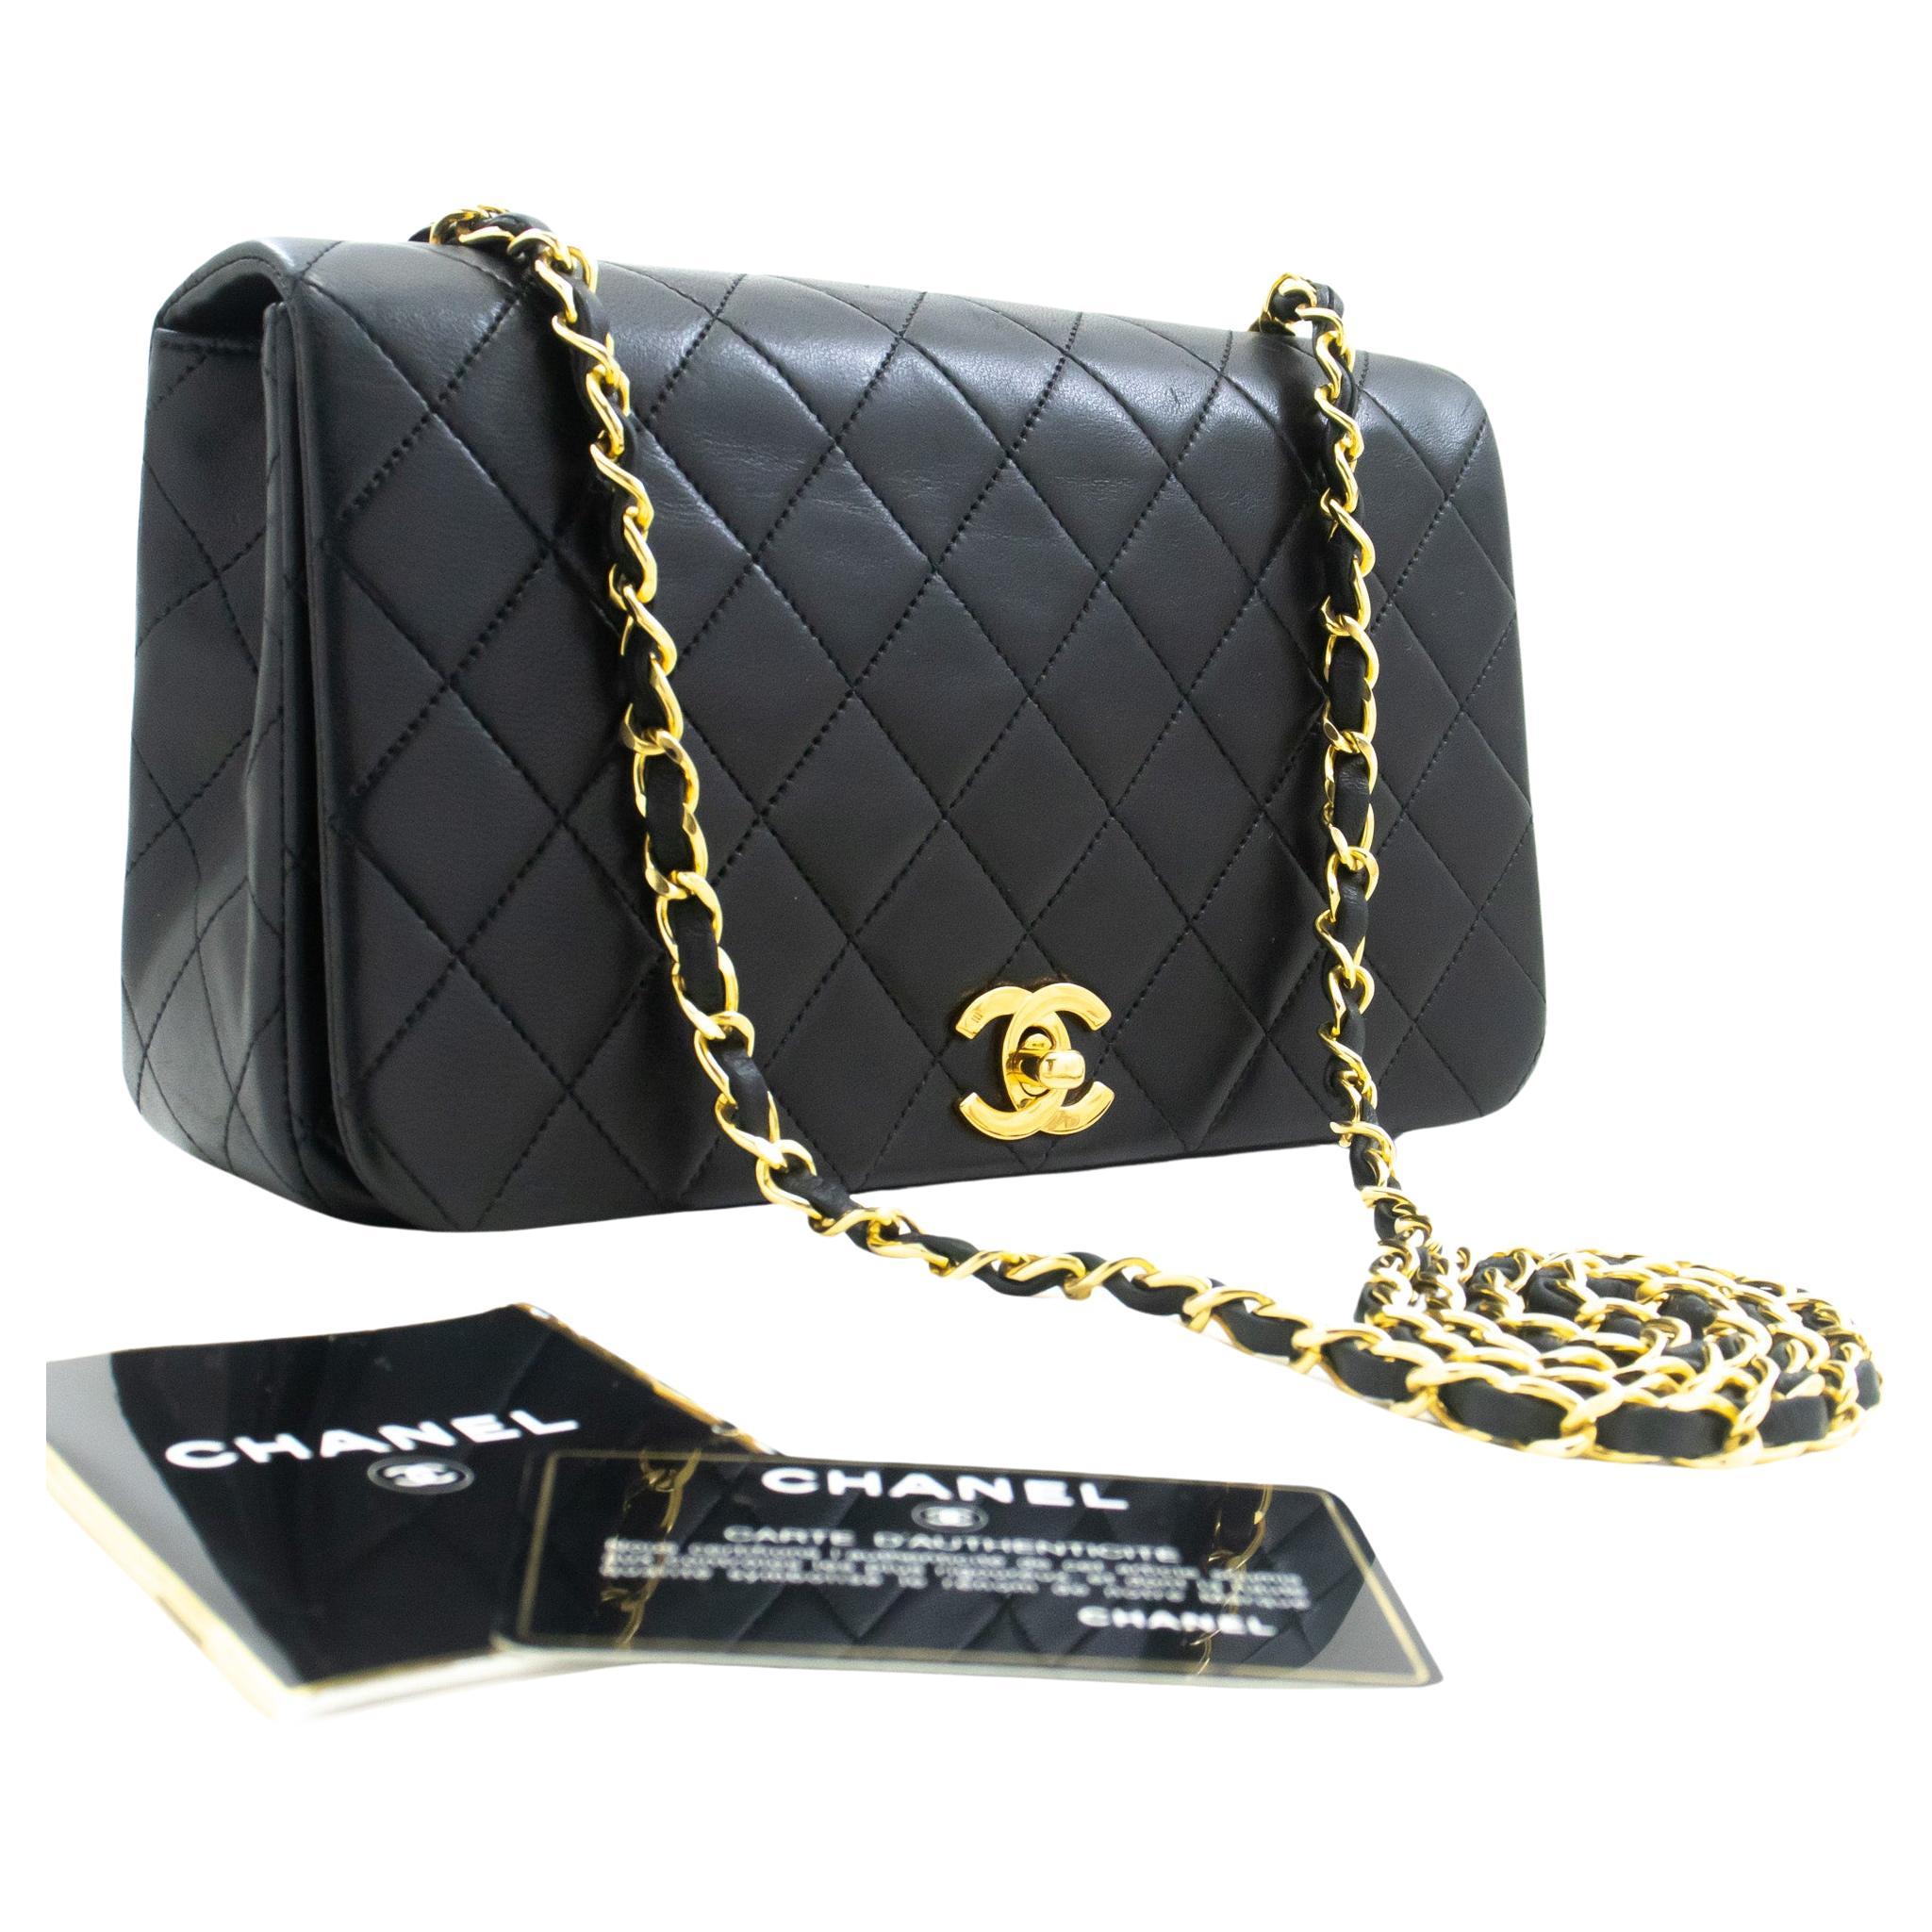 Why did Chanel discontinue the Single Flap bag?